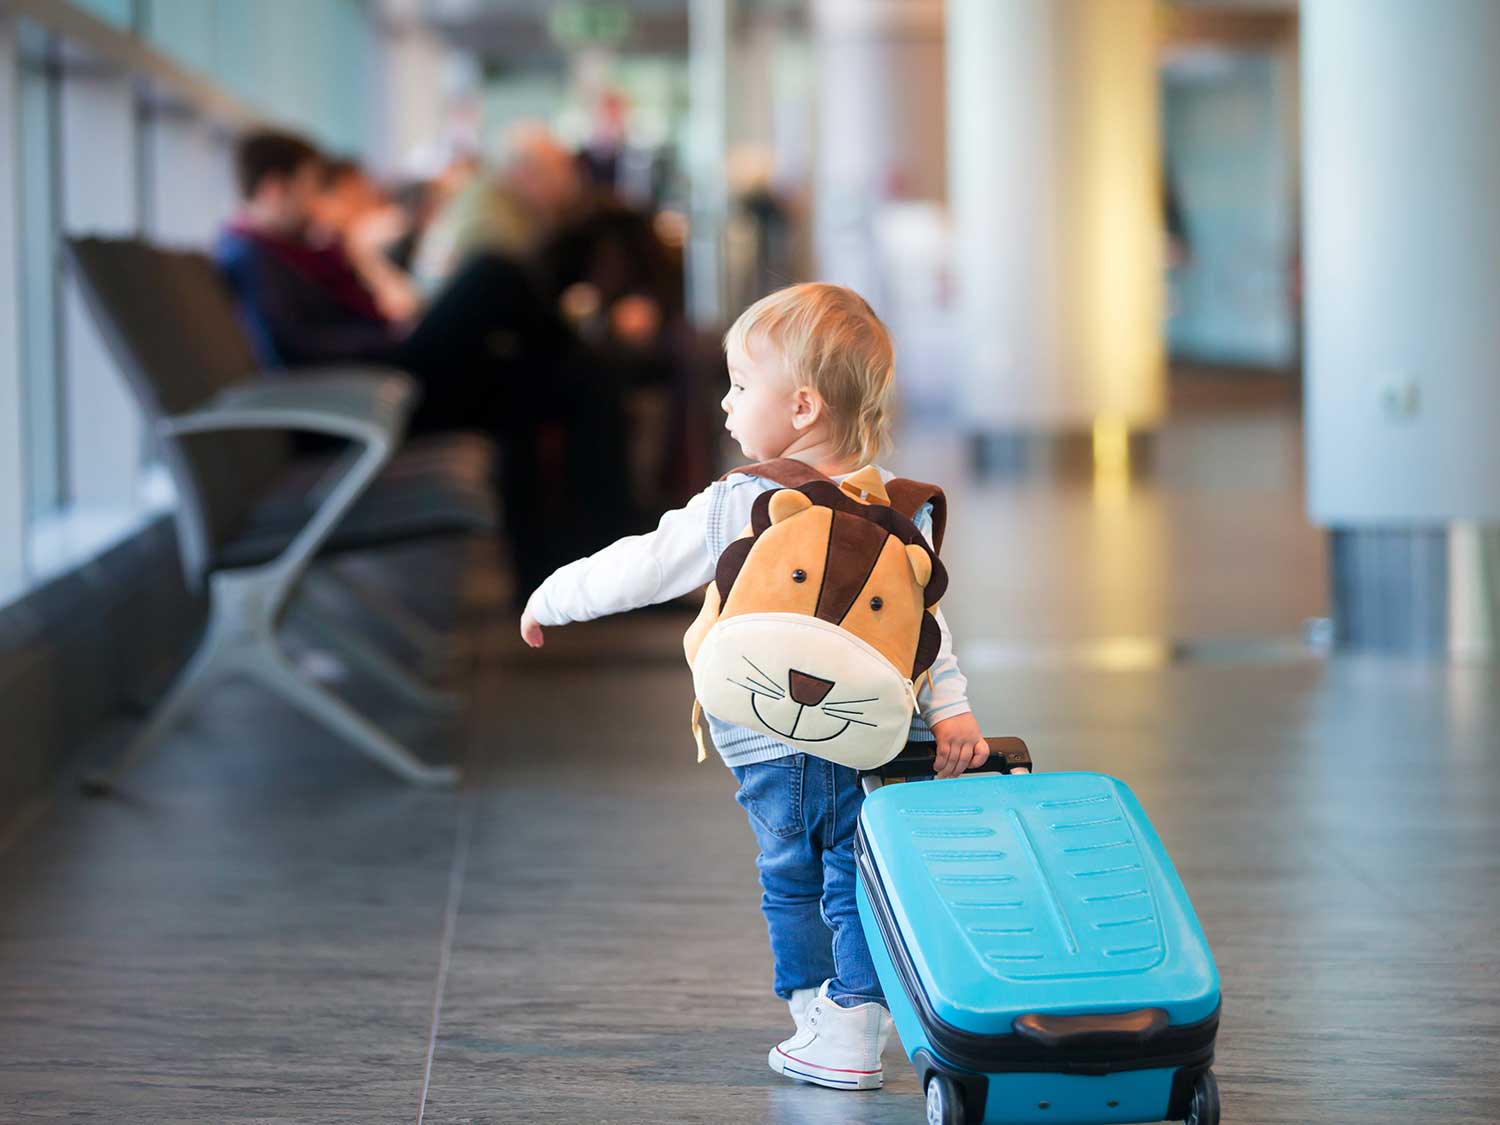 A child carrying luggage through an airport.